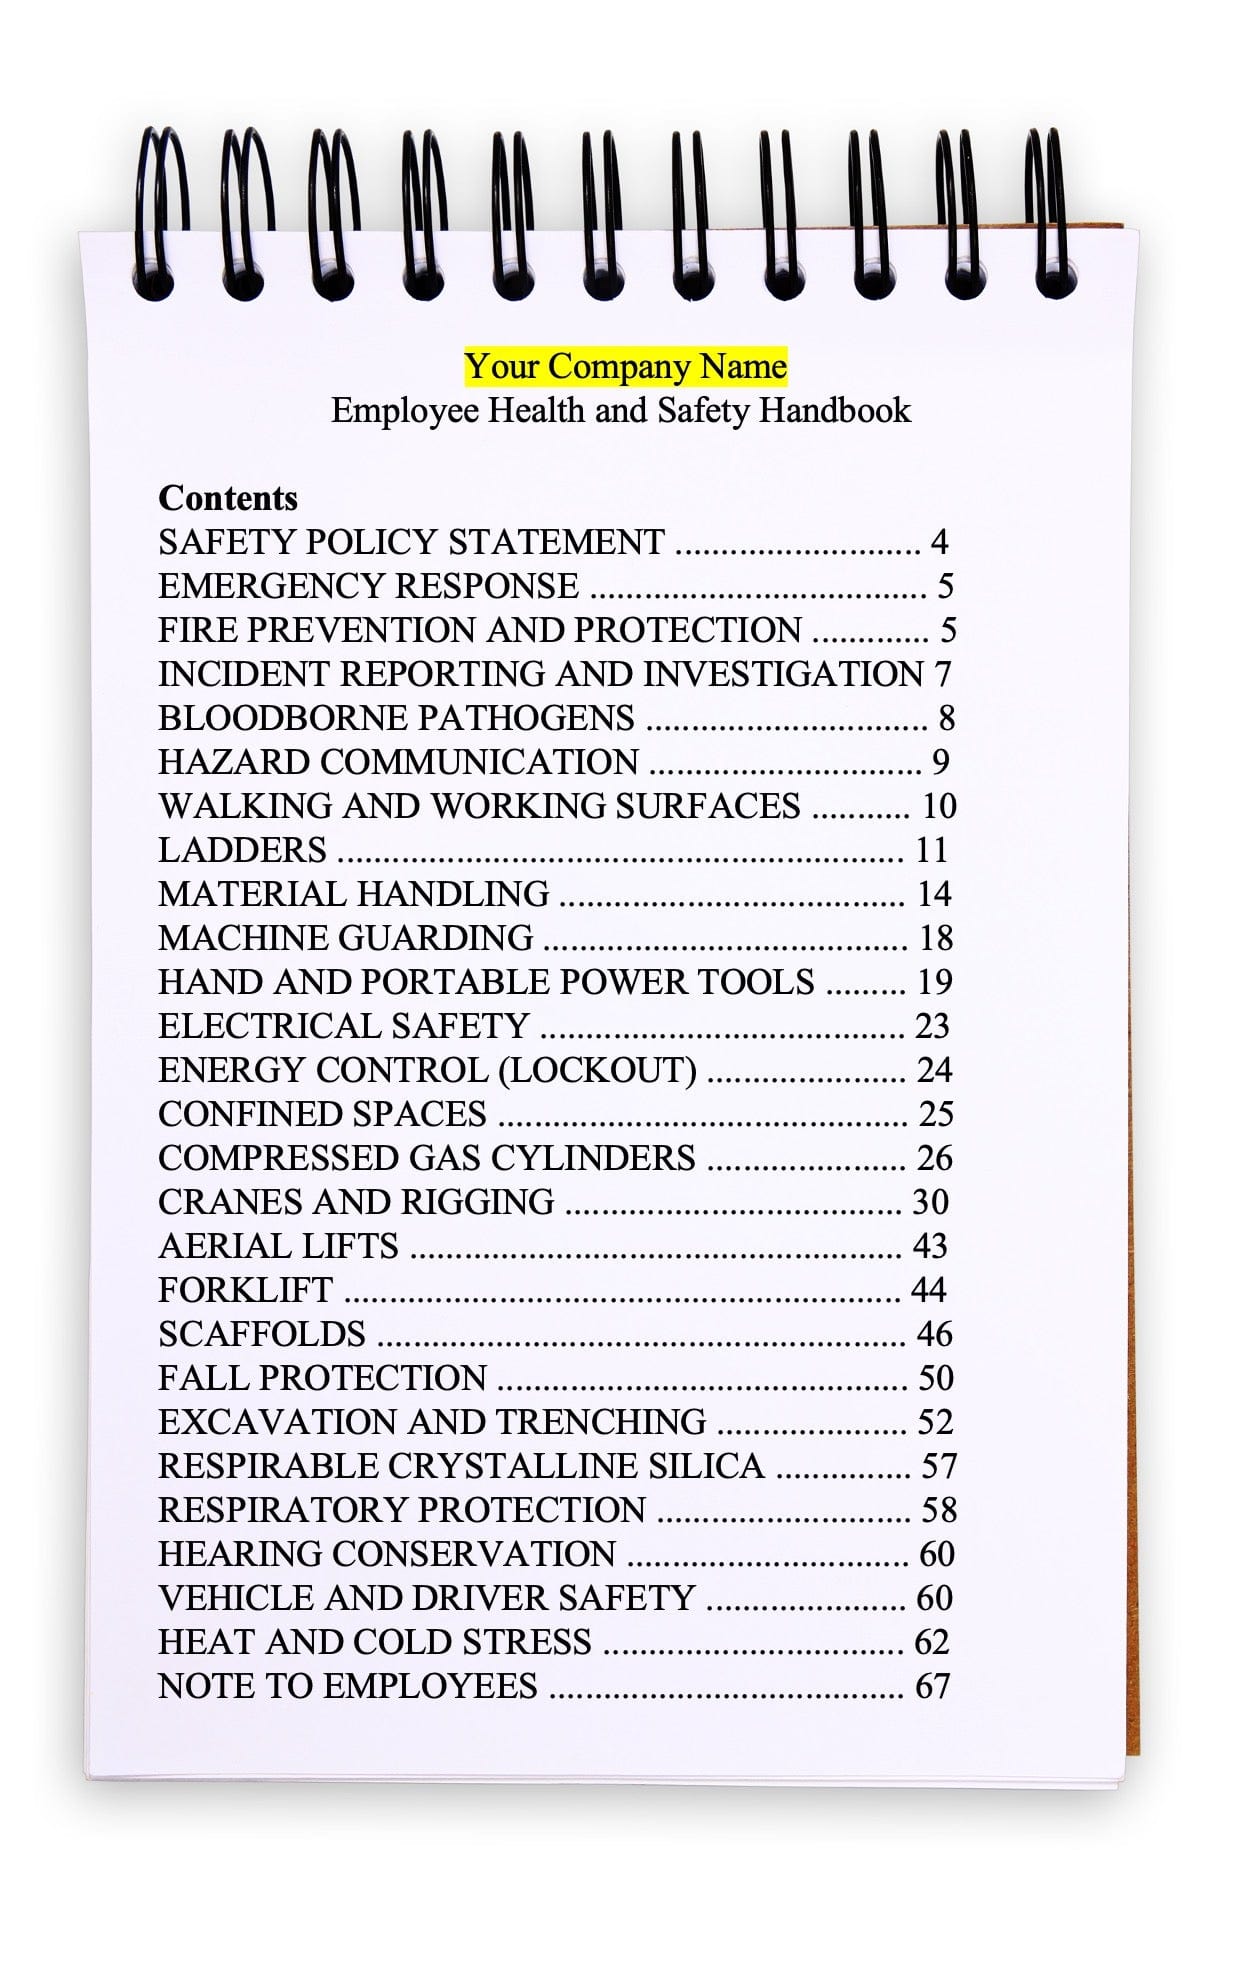 Employee Safety Handbook Table on Contents